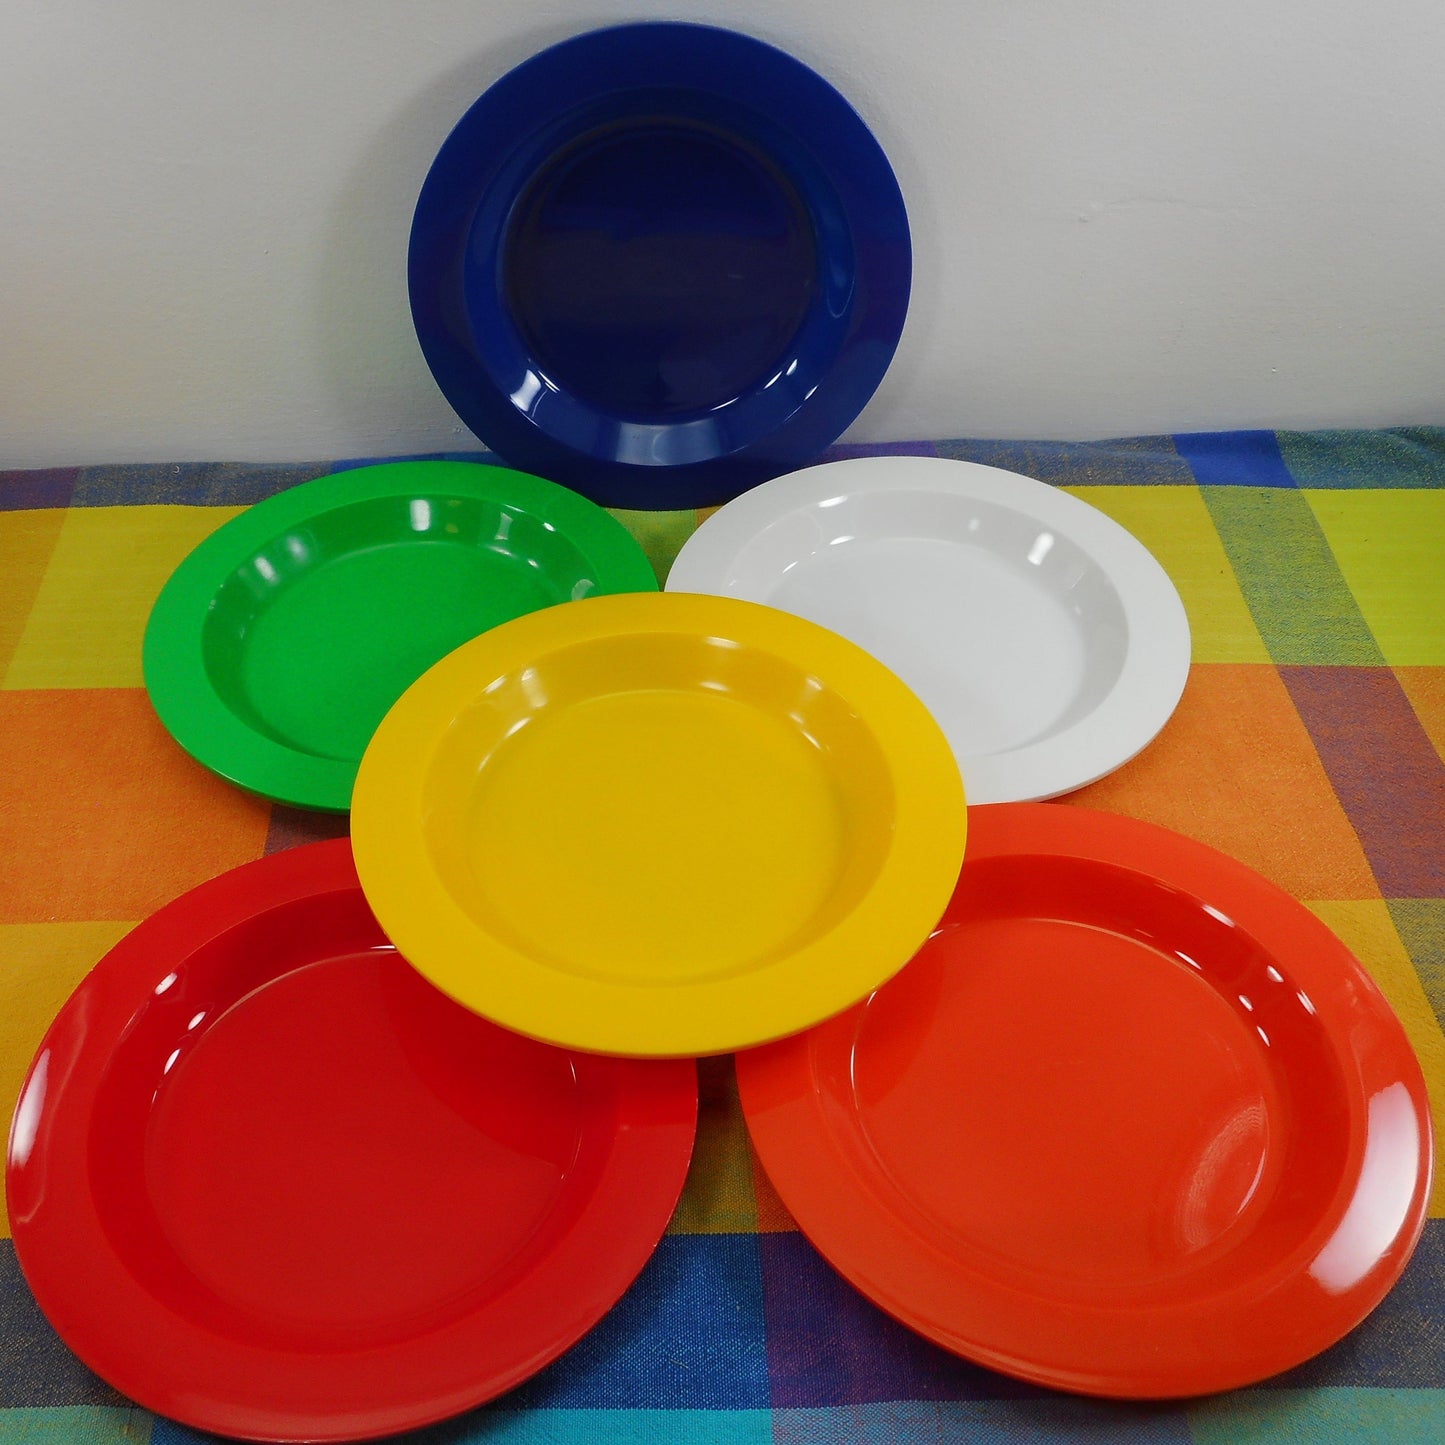 Ingrid Chicago Mod Plastic Party Ball Picnic Camping Set Replacement Part - Plate 8-3/8"